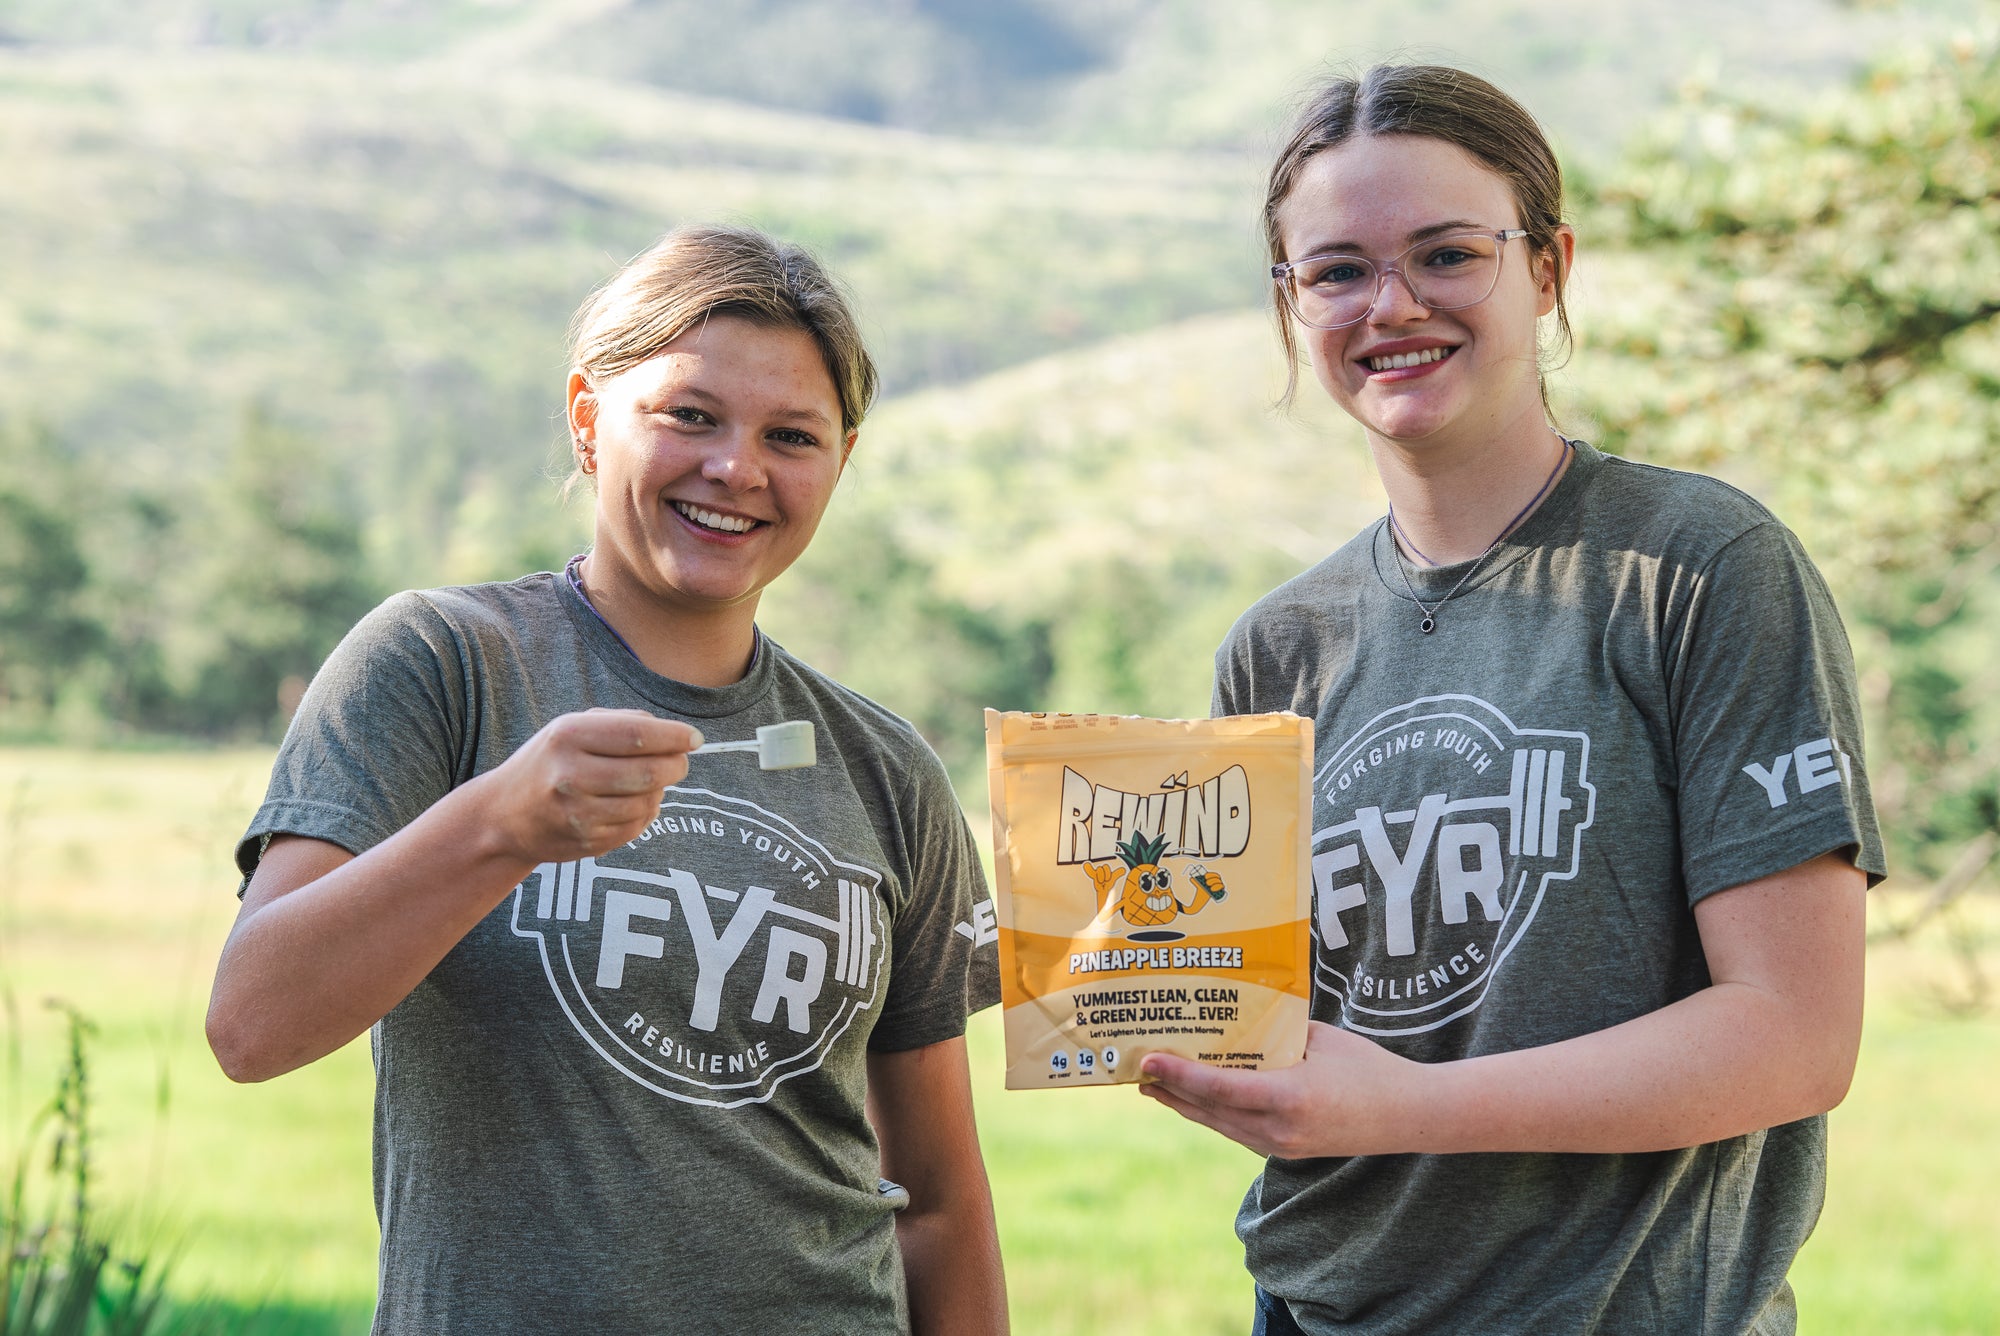 Two young women at camp FYR are smiling, holding a bag of Rewind super greens powder in a field